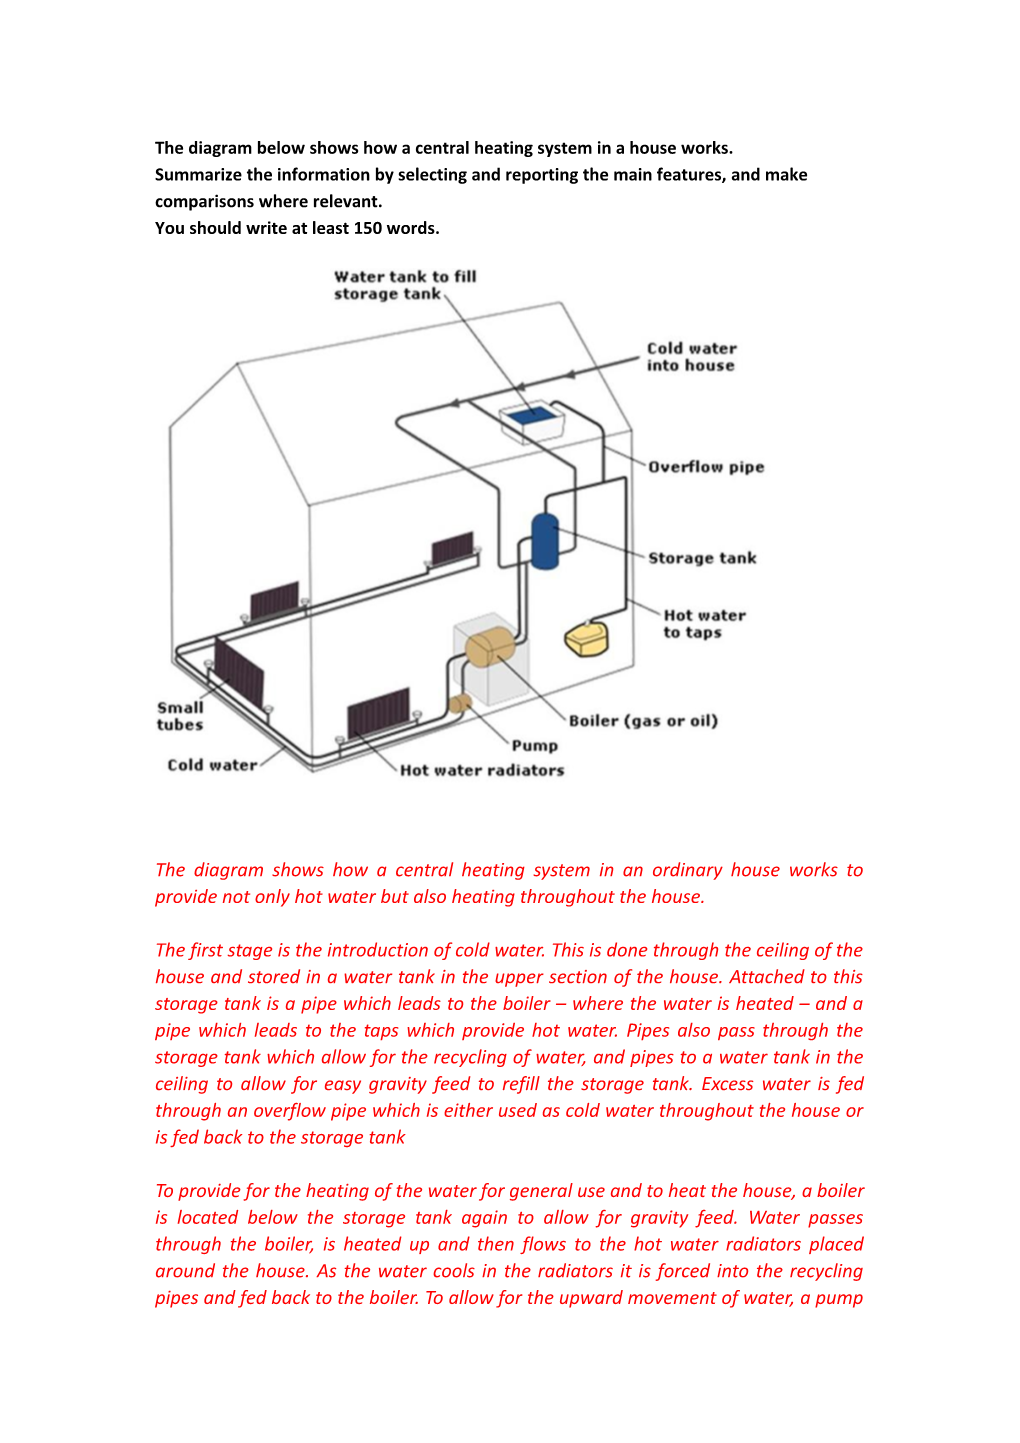 The Diagram Below Shows How a Central Heating System in a House Works